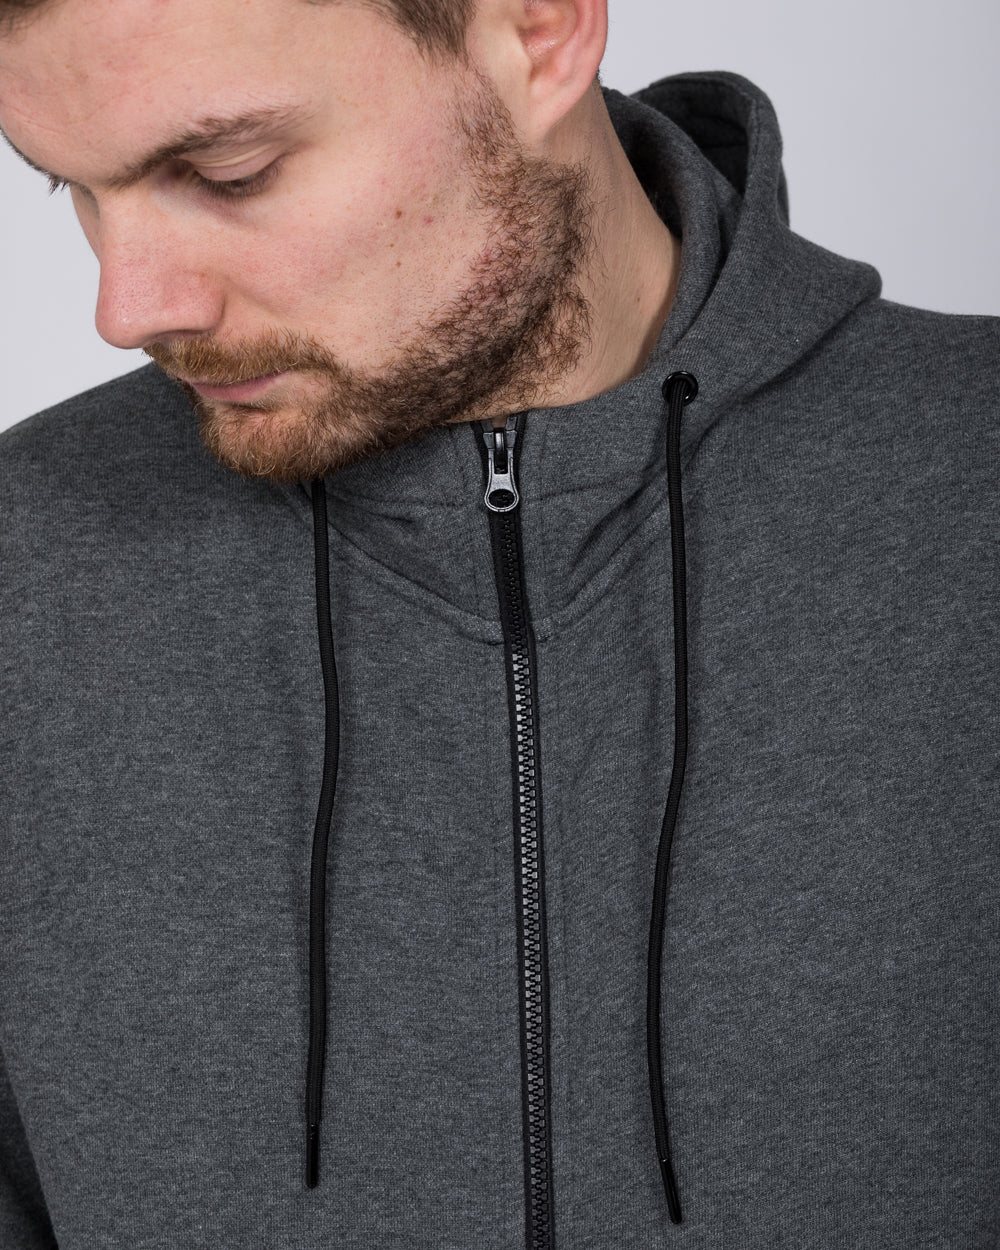 2t Zip Up Tall Active Hoodie (charcoal)